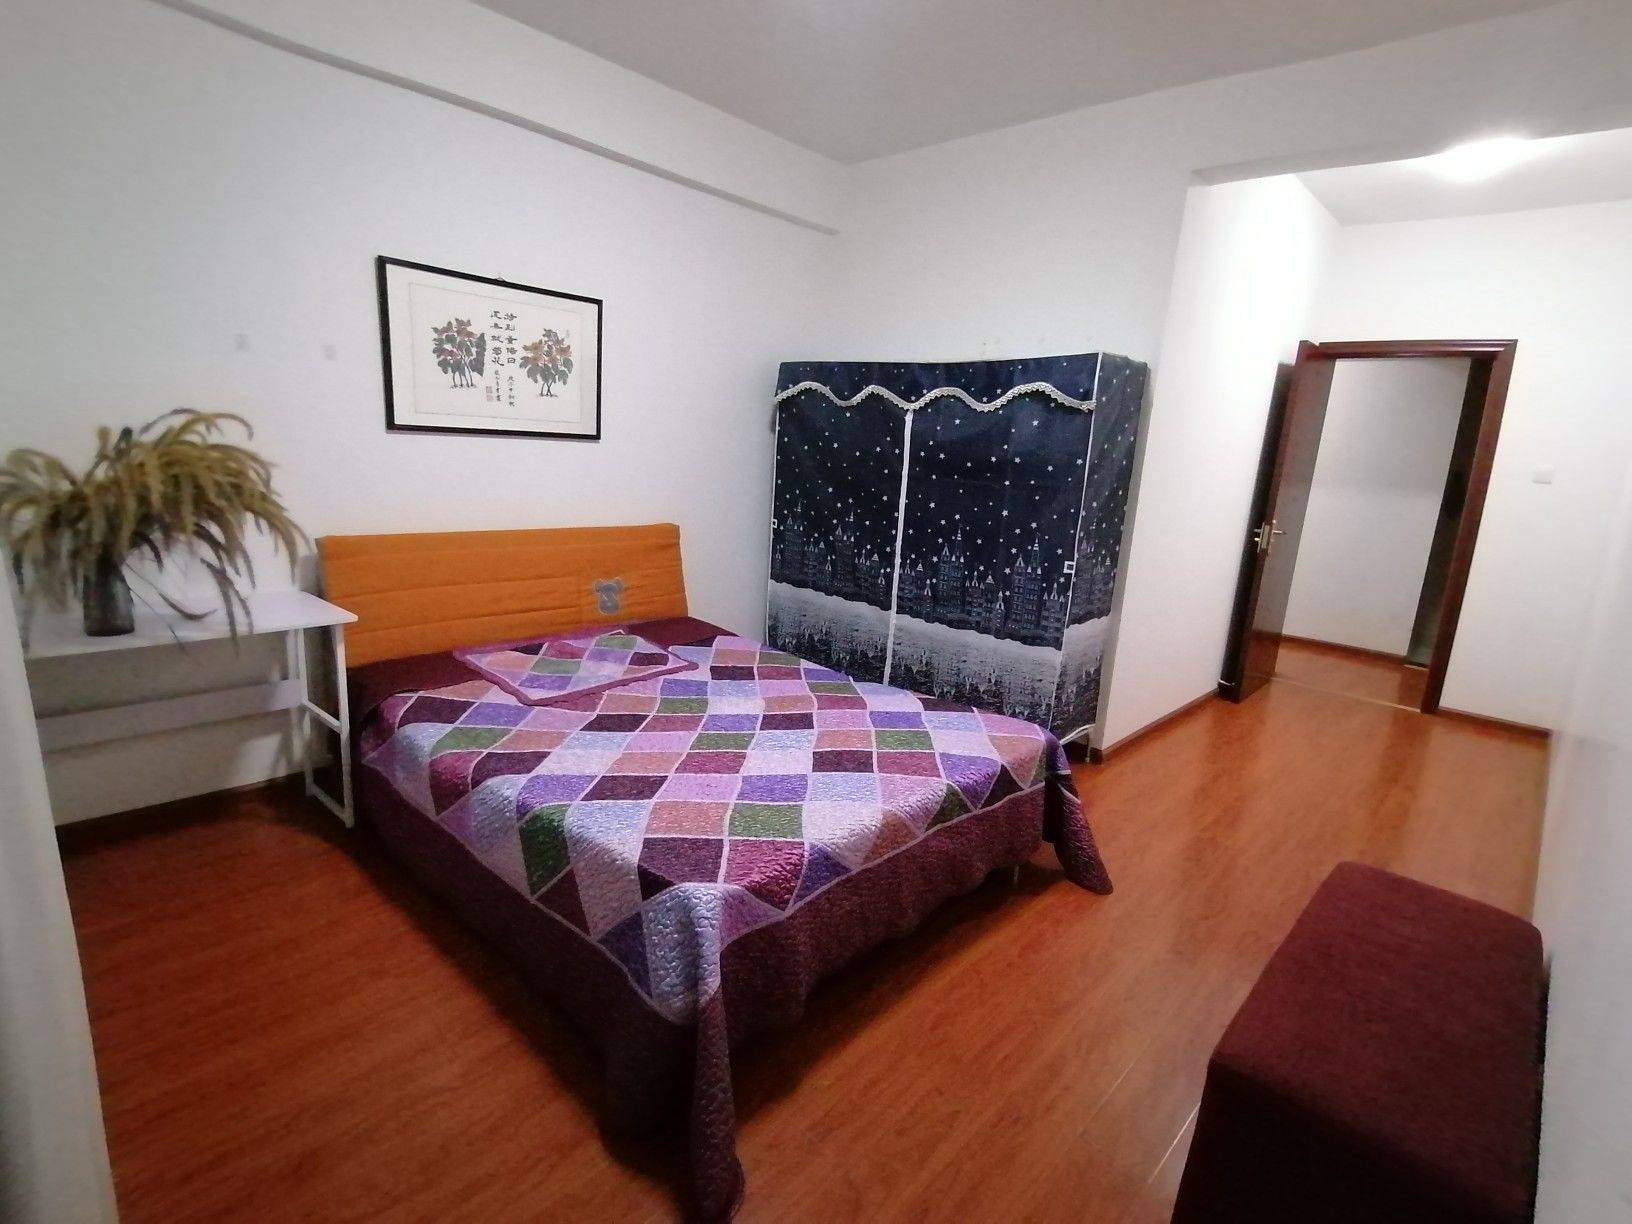 Kunming-Chenggong-Cozy Home,Clean&Comfy,No Gender Limit,Hustle & Bustle,Chilled,LGBTQ Friendly